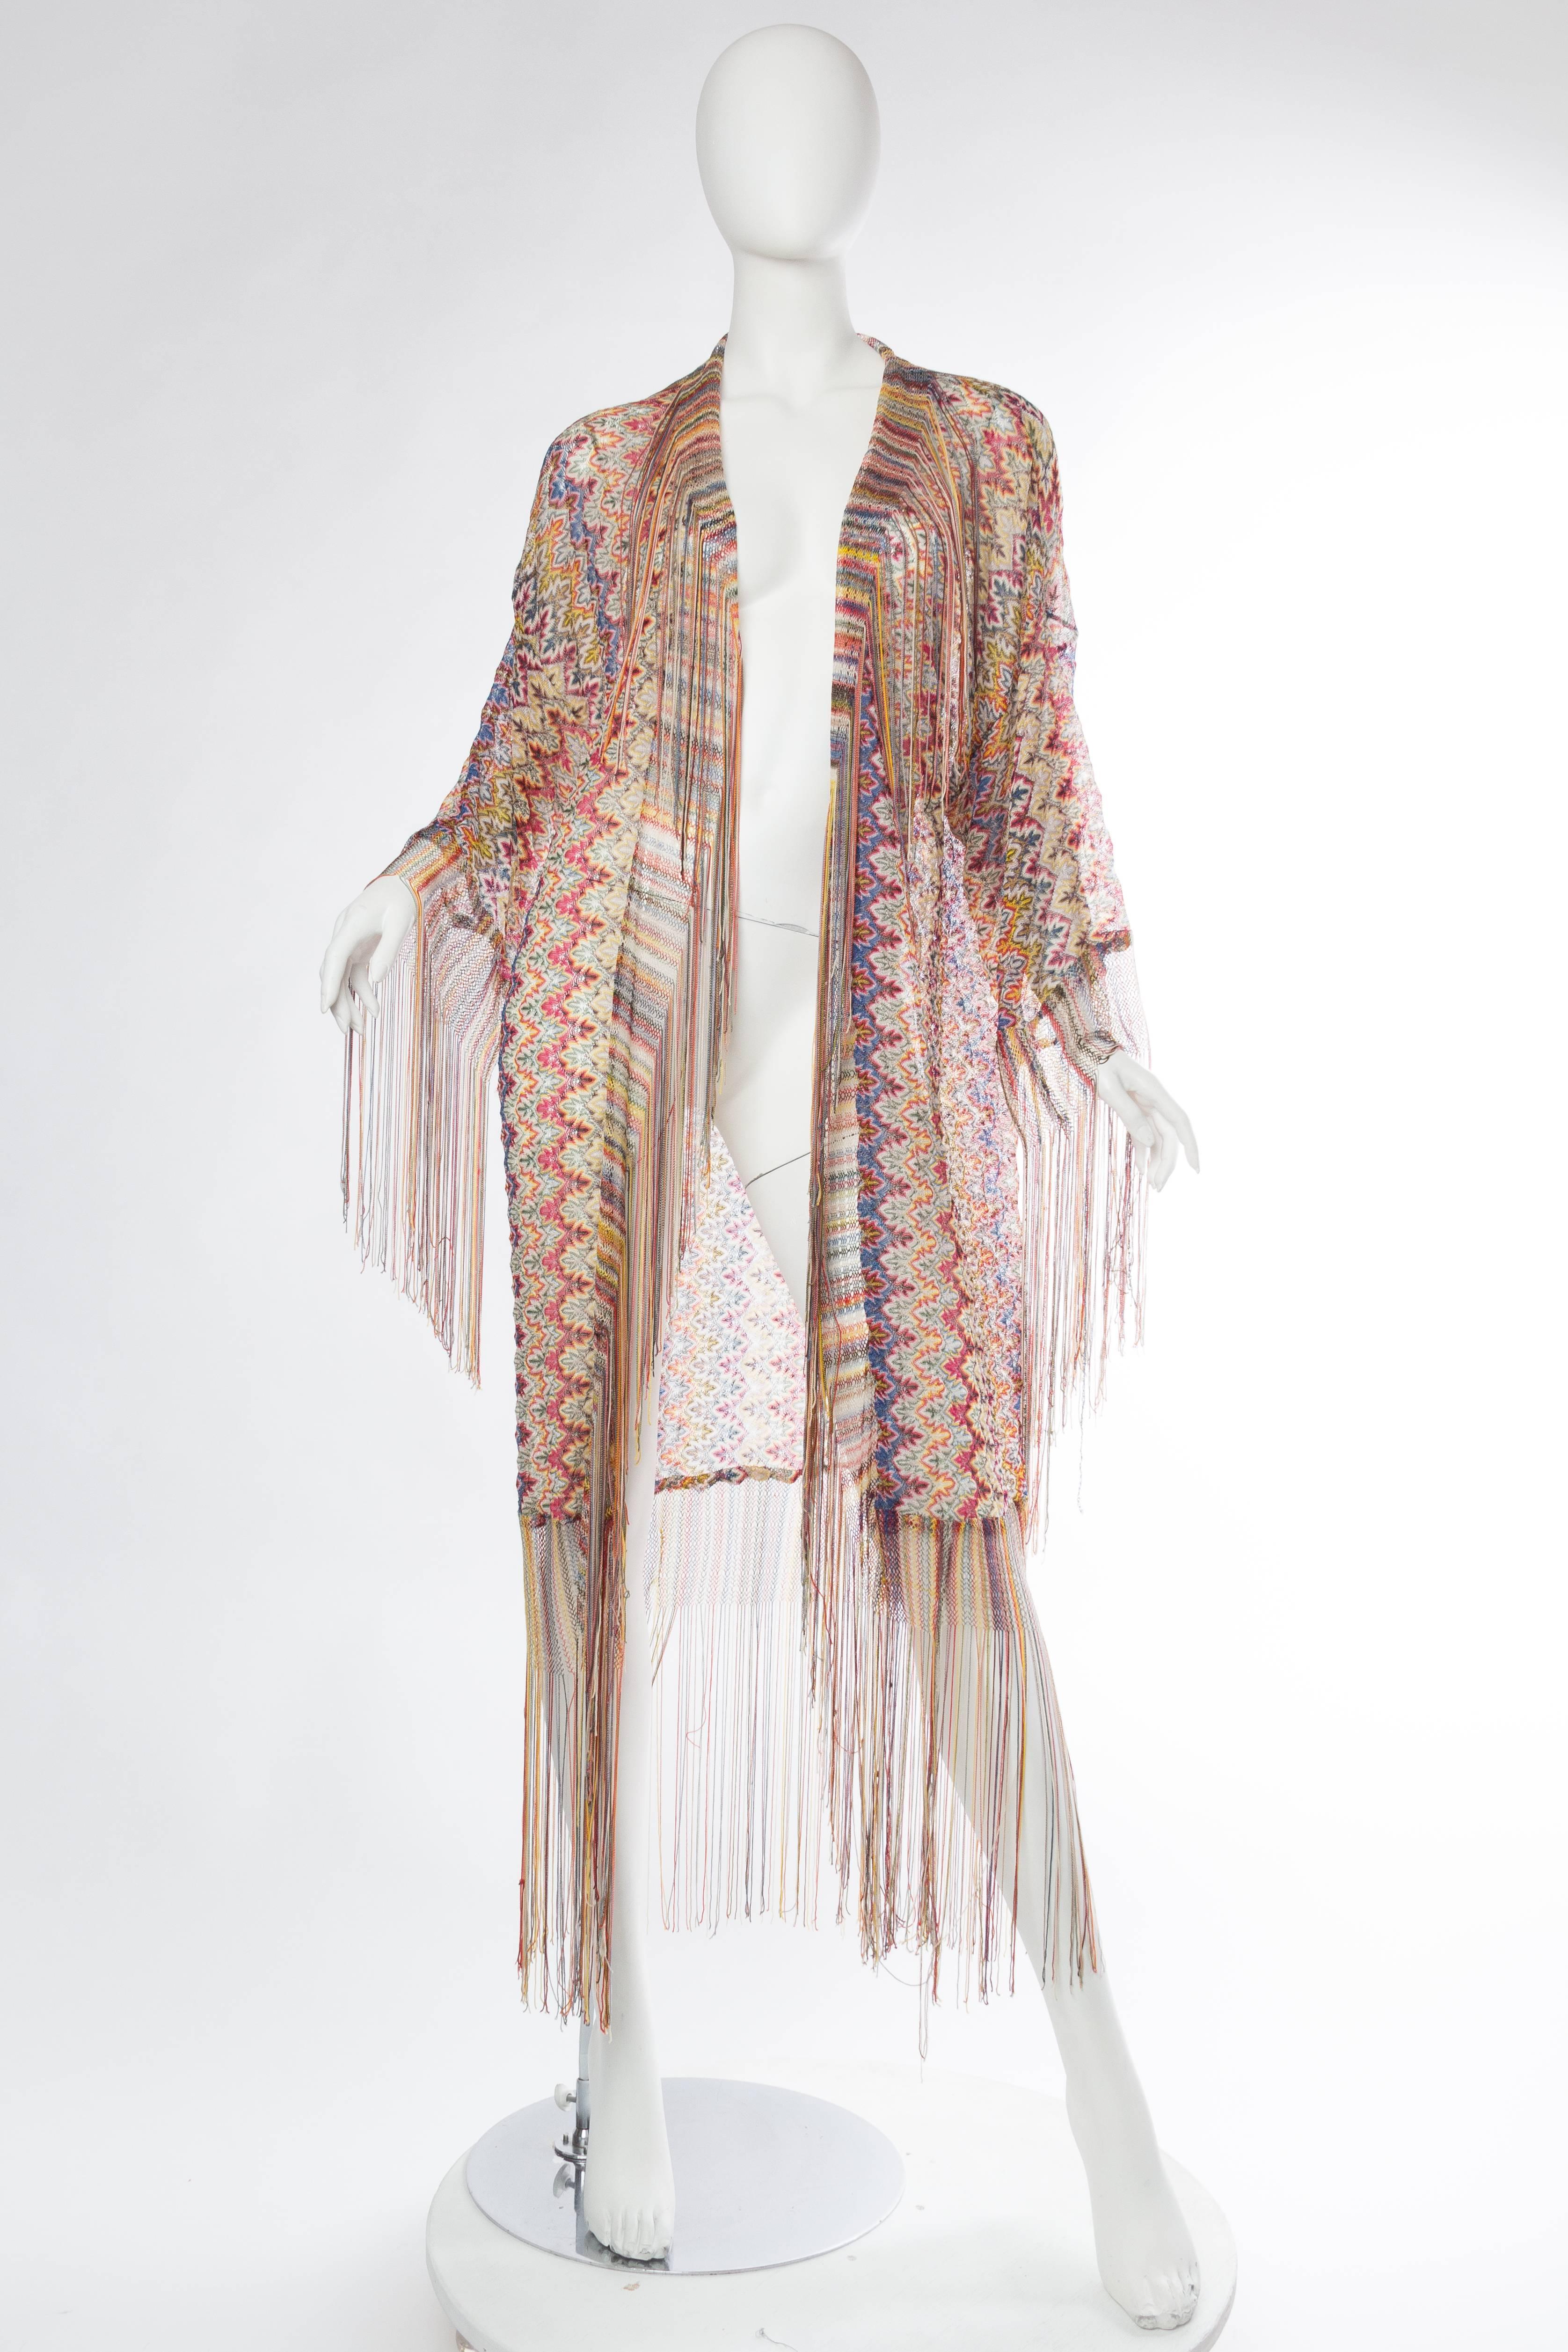 Made from an antique shawl either from the 1920s or 1970s. 